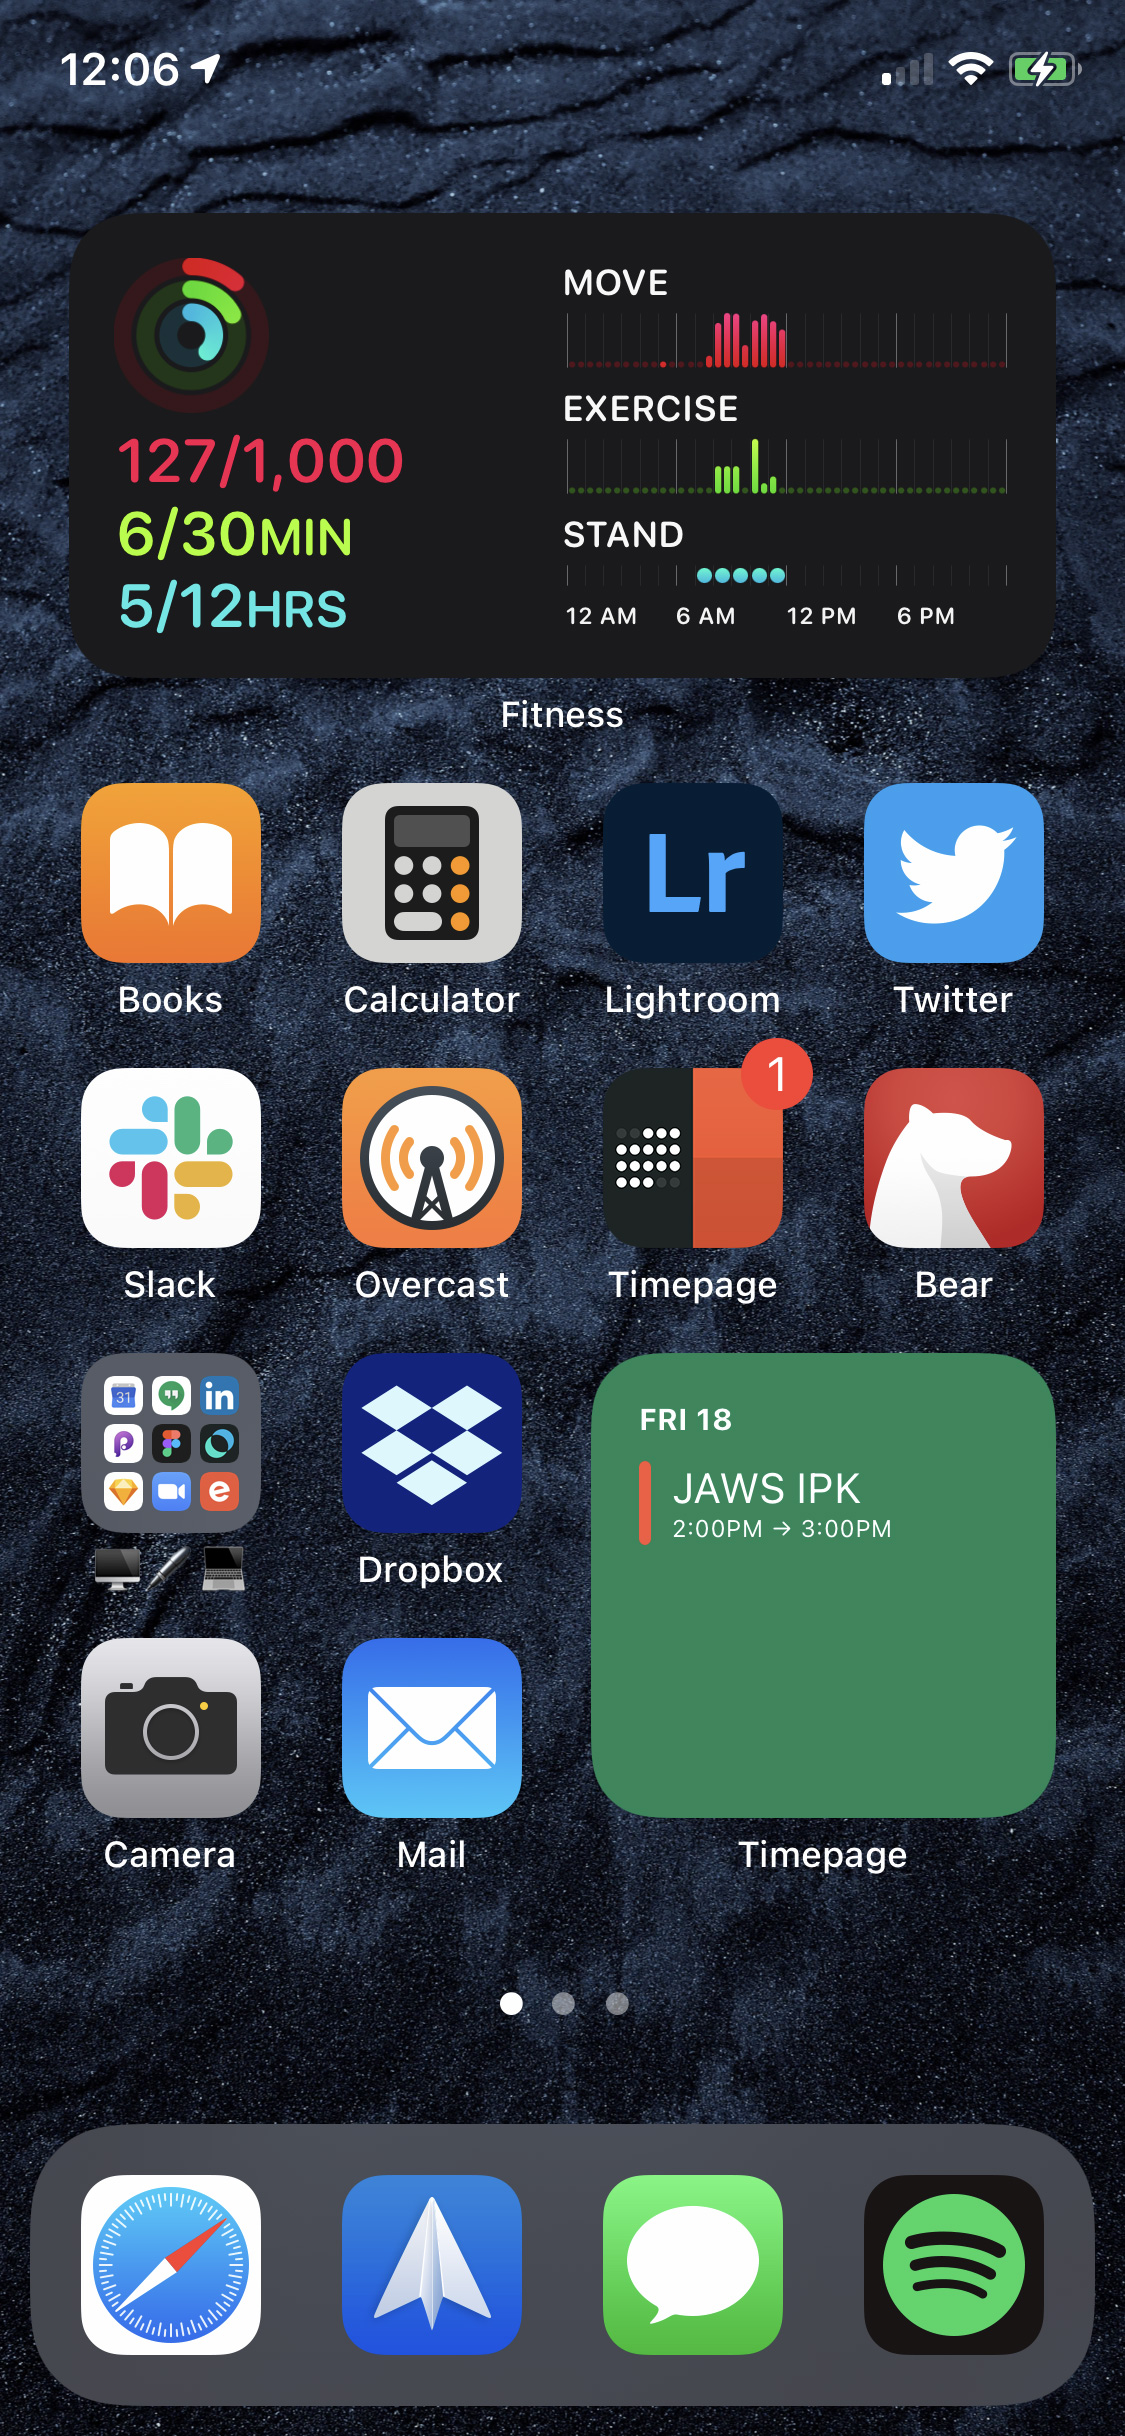 Home Screen 1 - Most Used Apps and Work-Related Apps